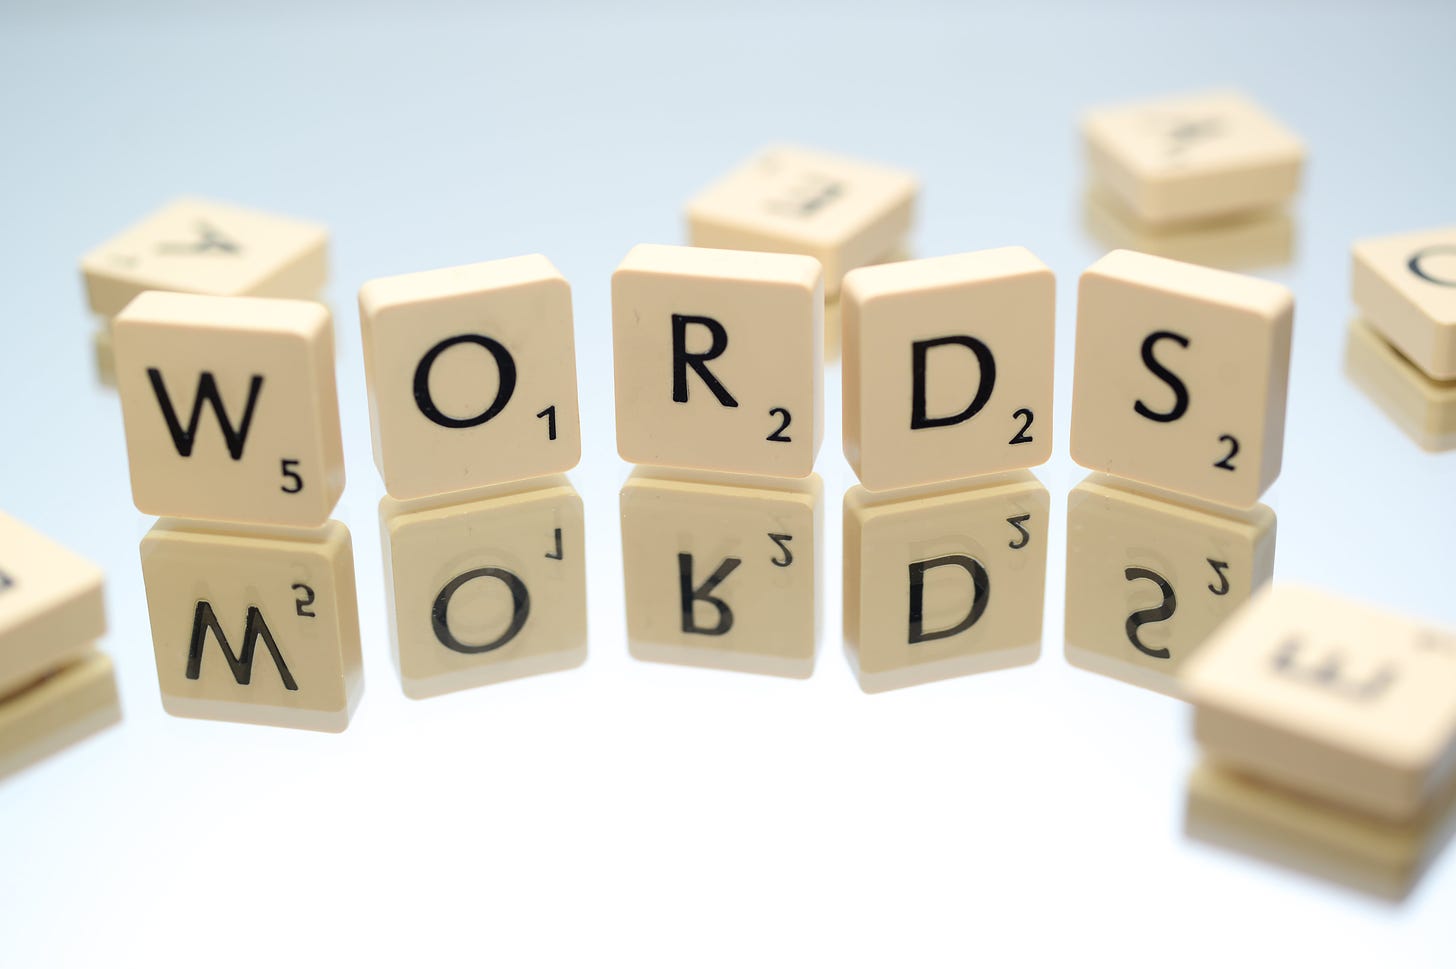 Scrabble pieces that build the word "words"